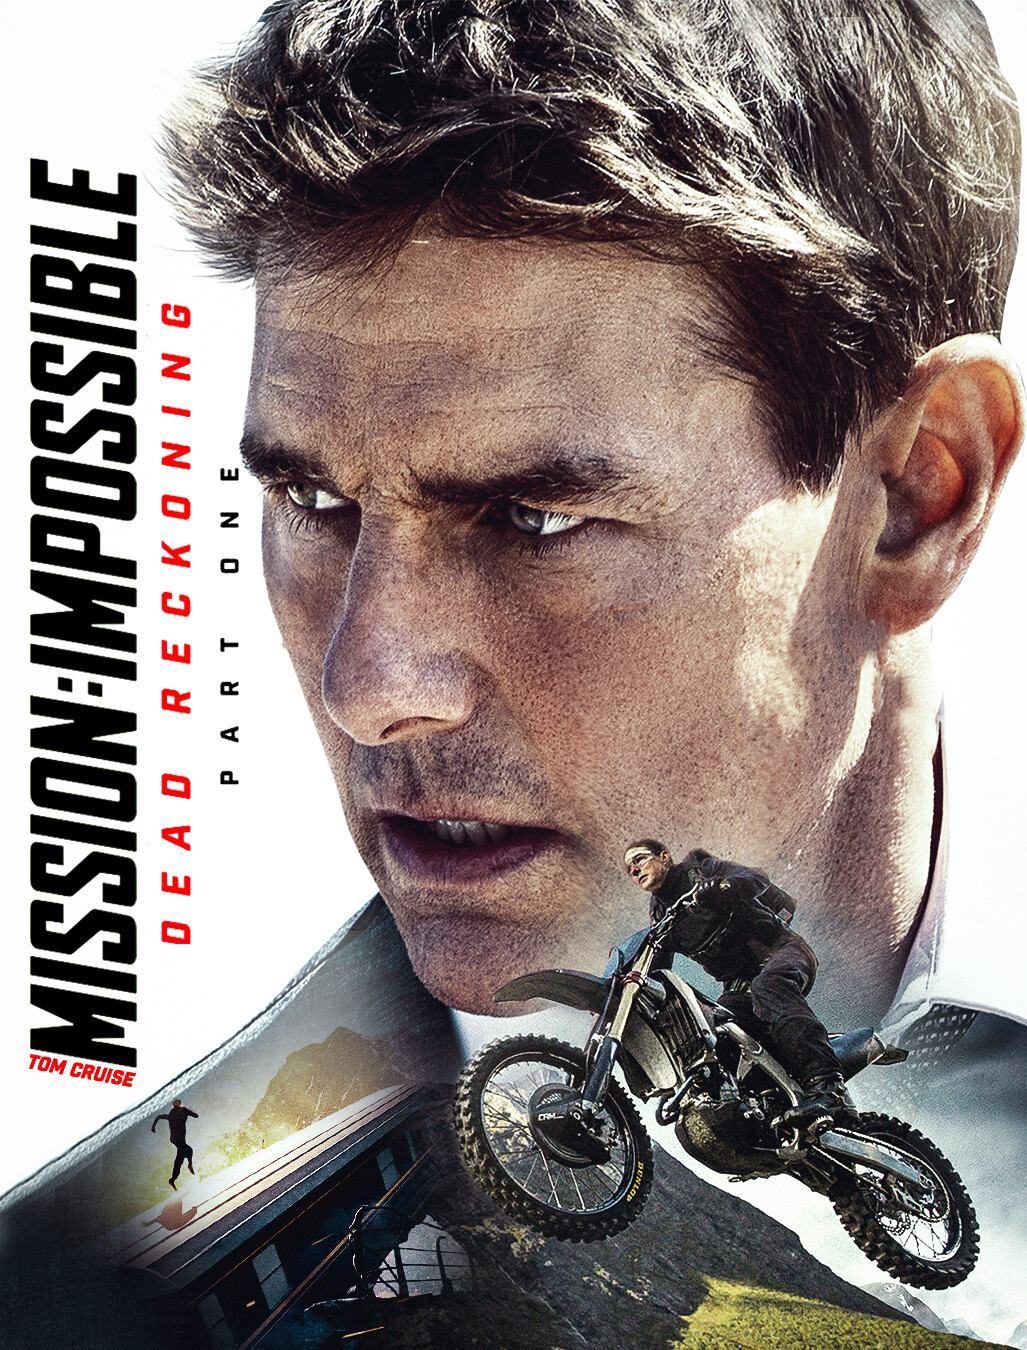 biography of film mission impossible dead reckoning